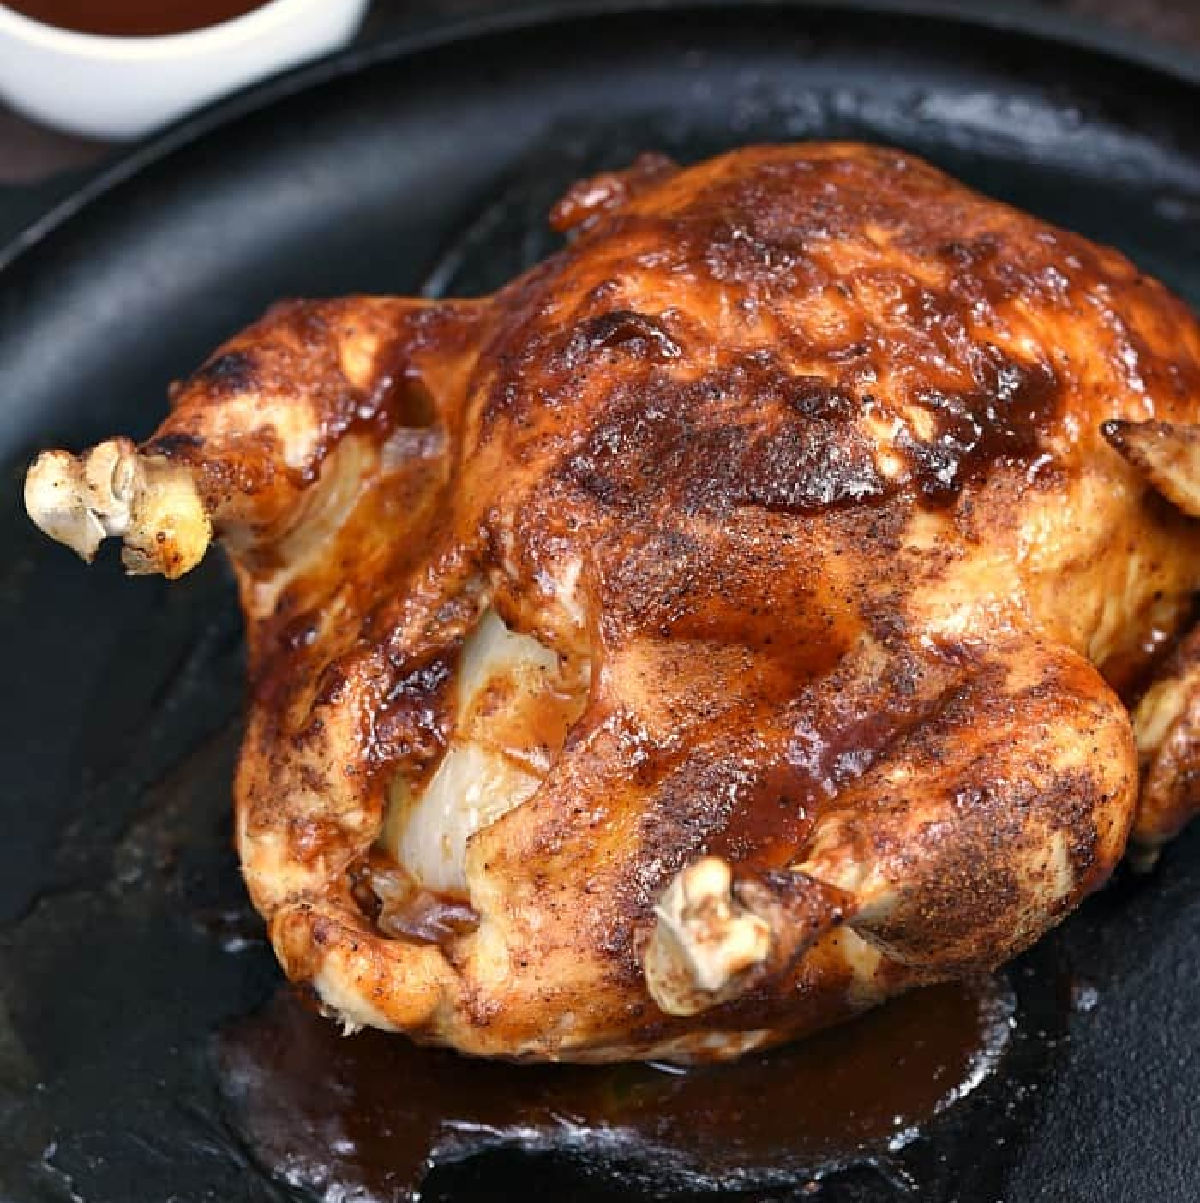 Whole chicken covered in barbecue sauce on a cast iron skillet.